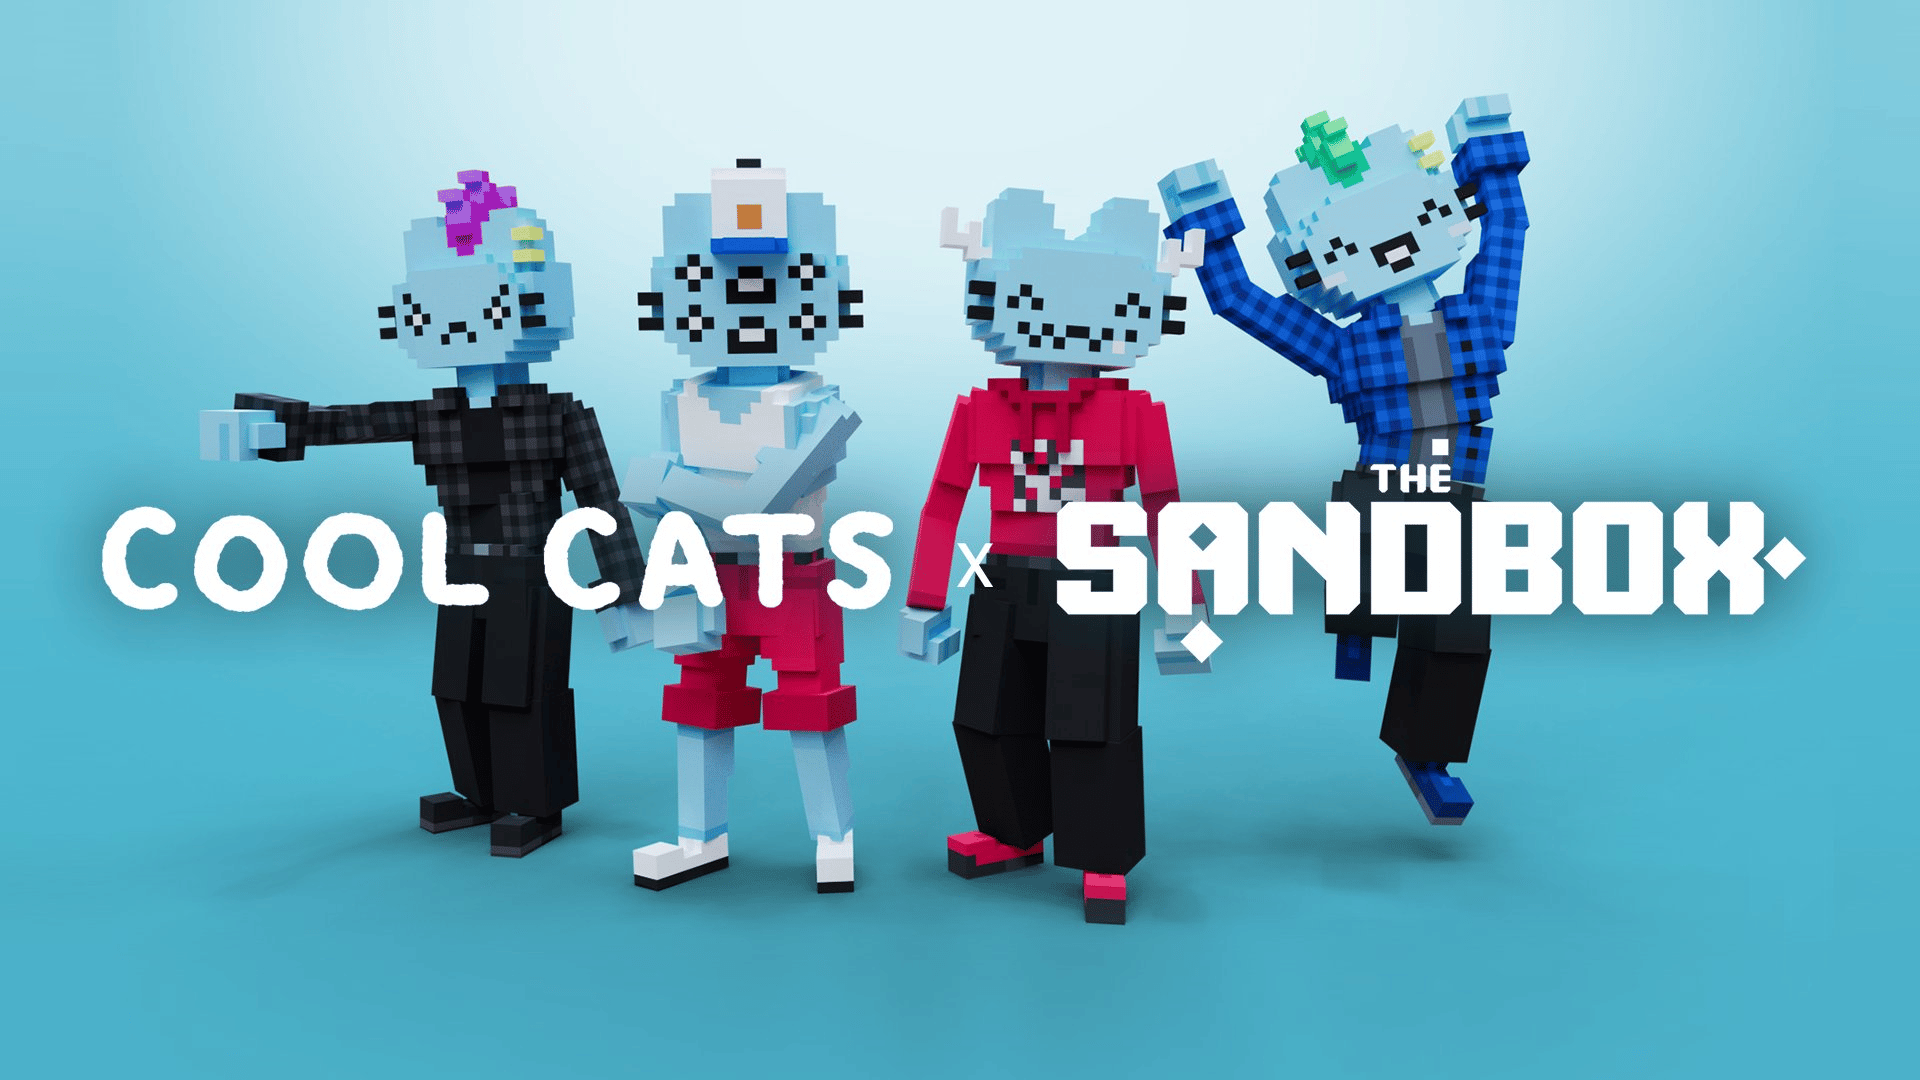 Sandbox Releases Their New Avatars Based on Cool Cats and BAYC!